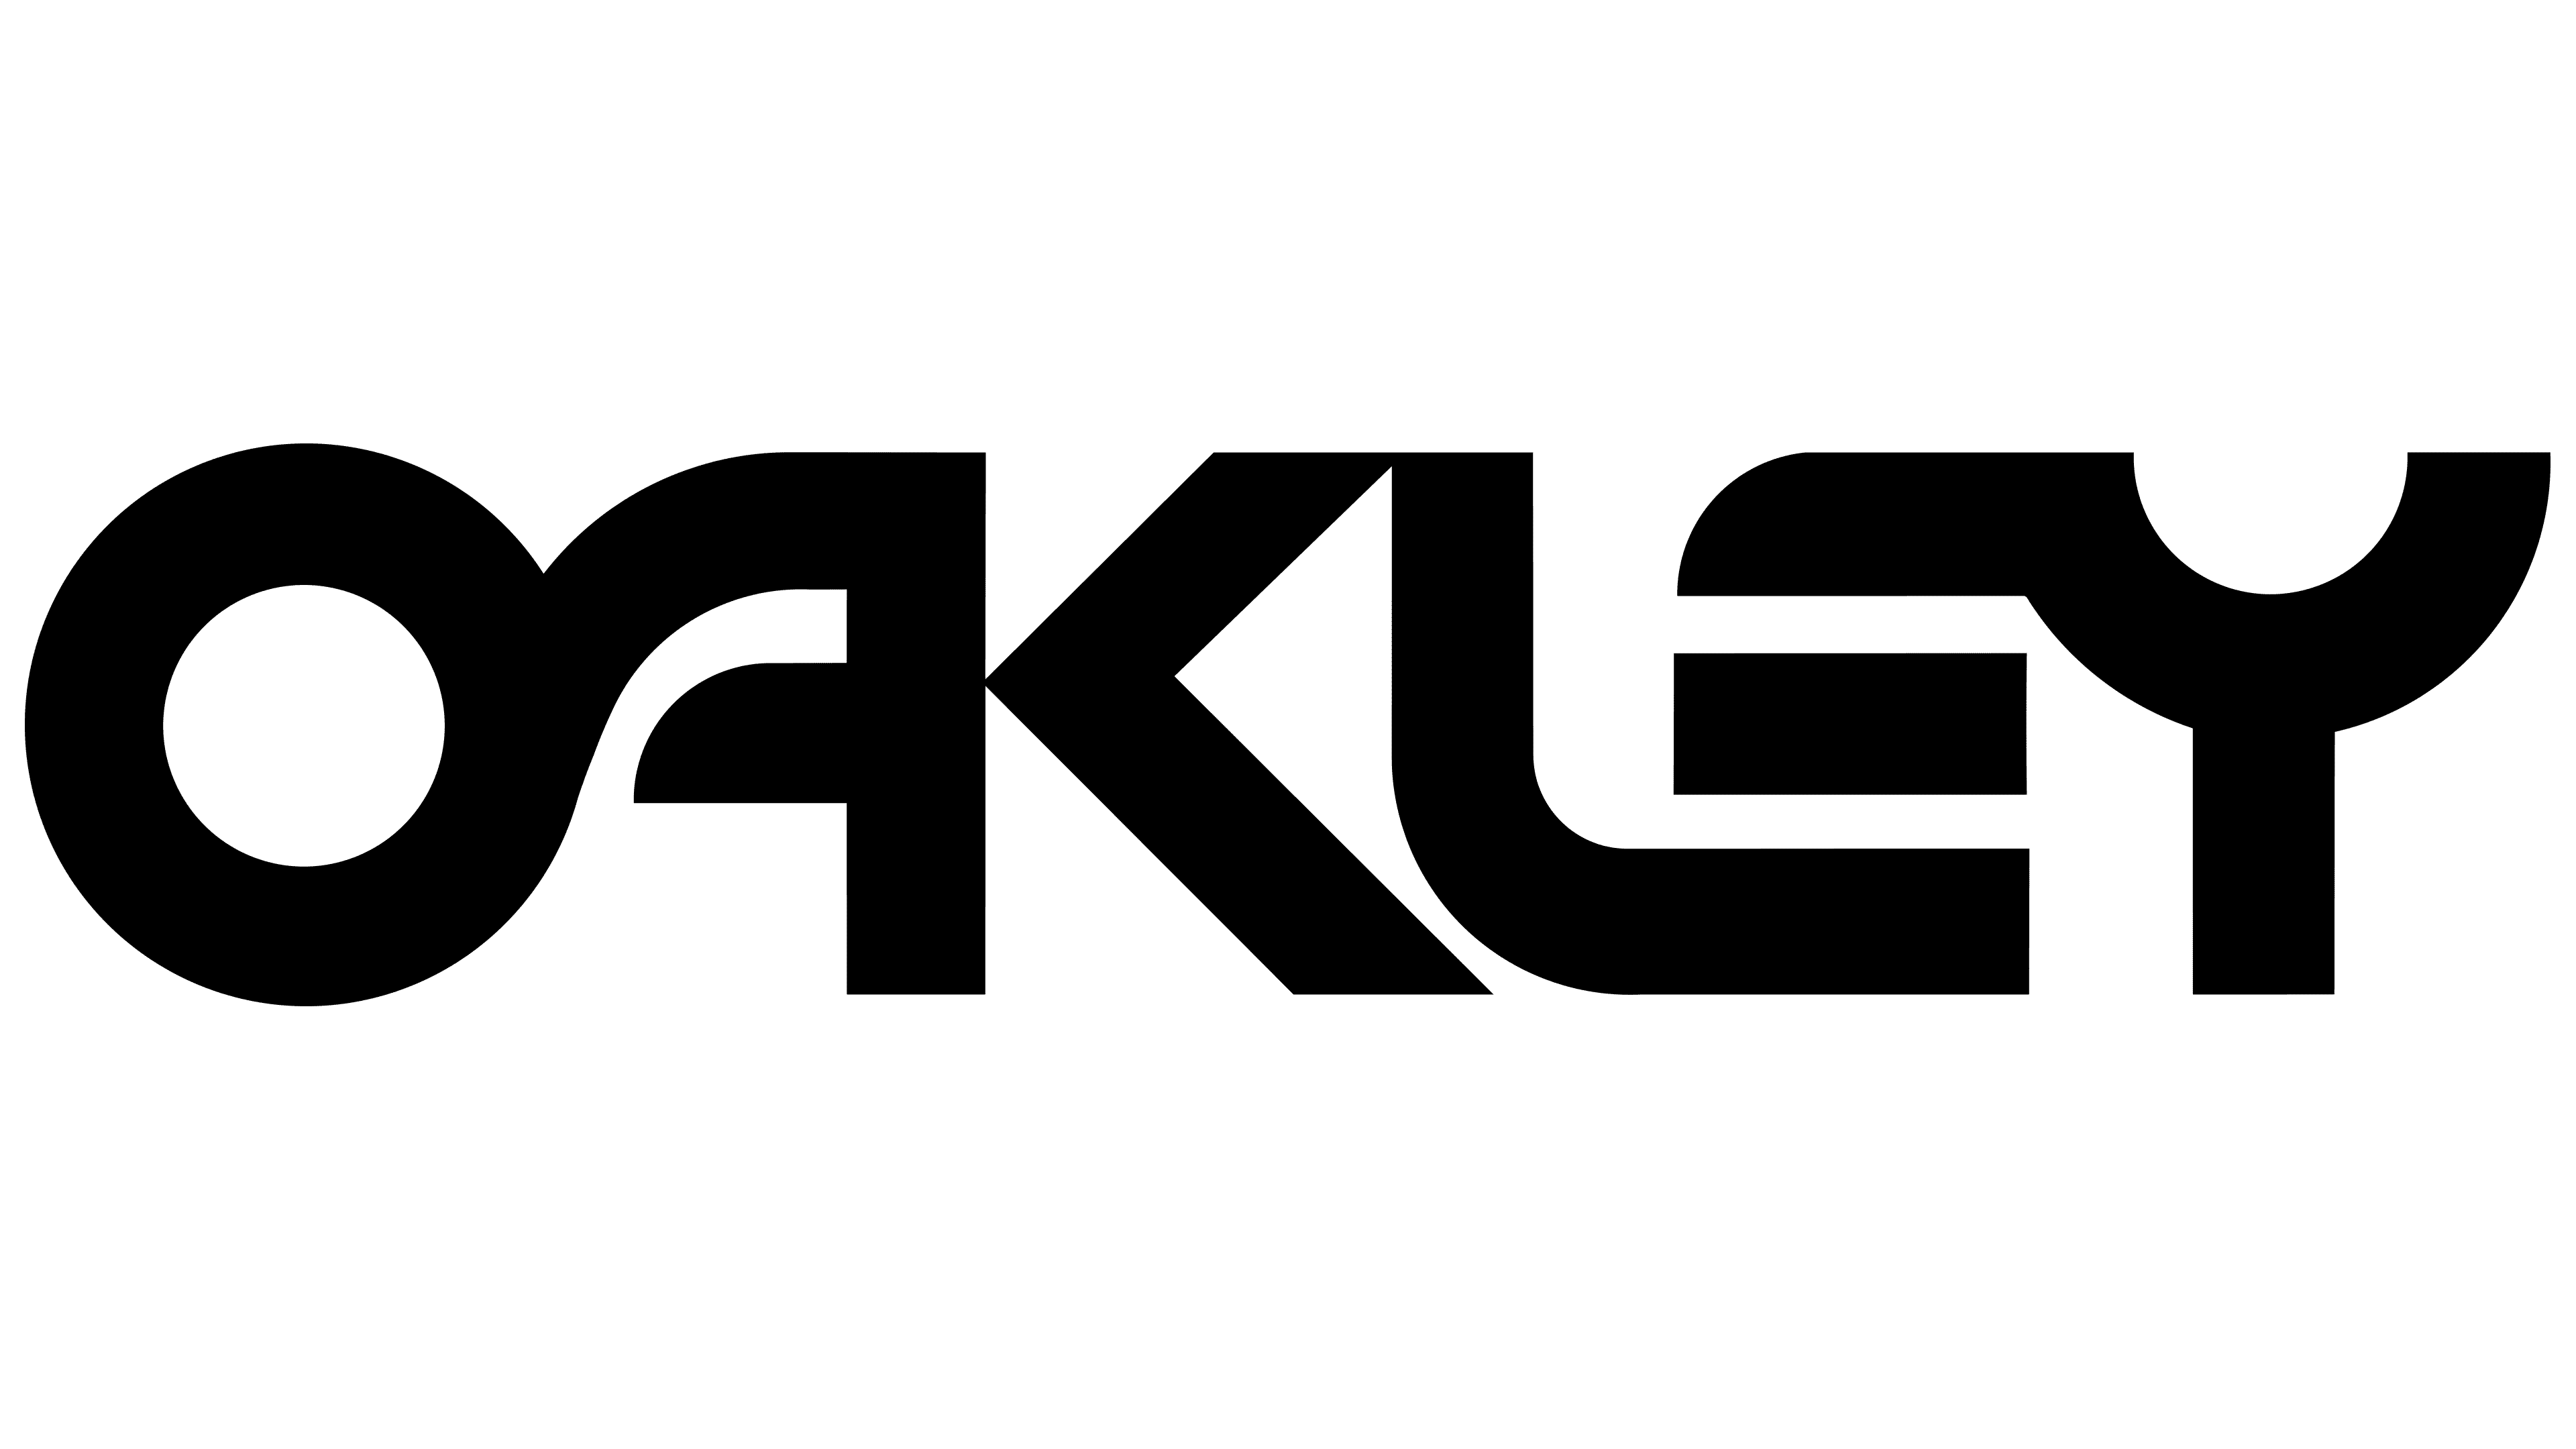 Oakley Logo The Most Famous Brands And Company Logos In The World